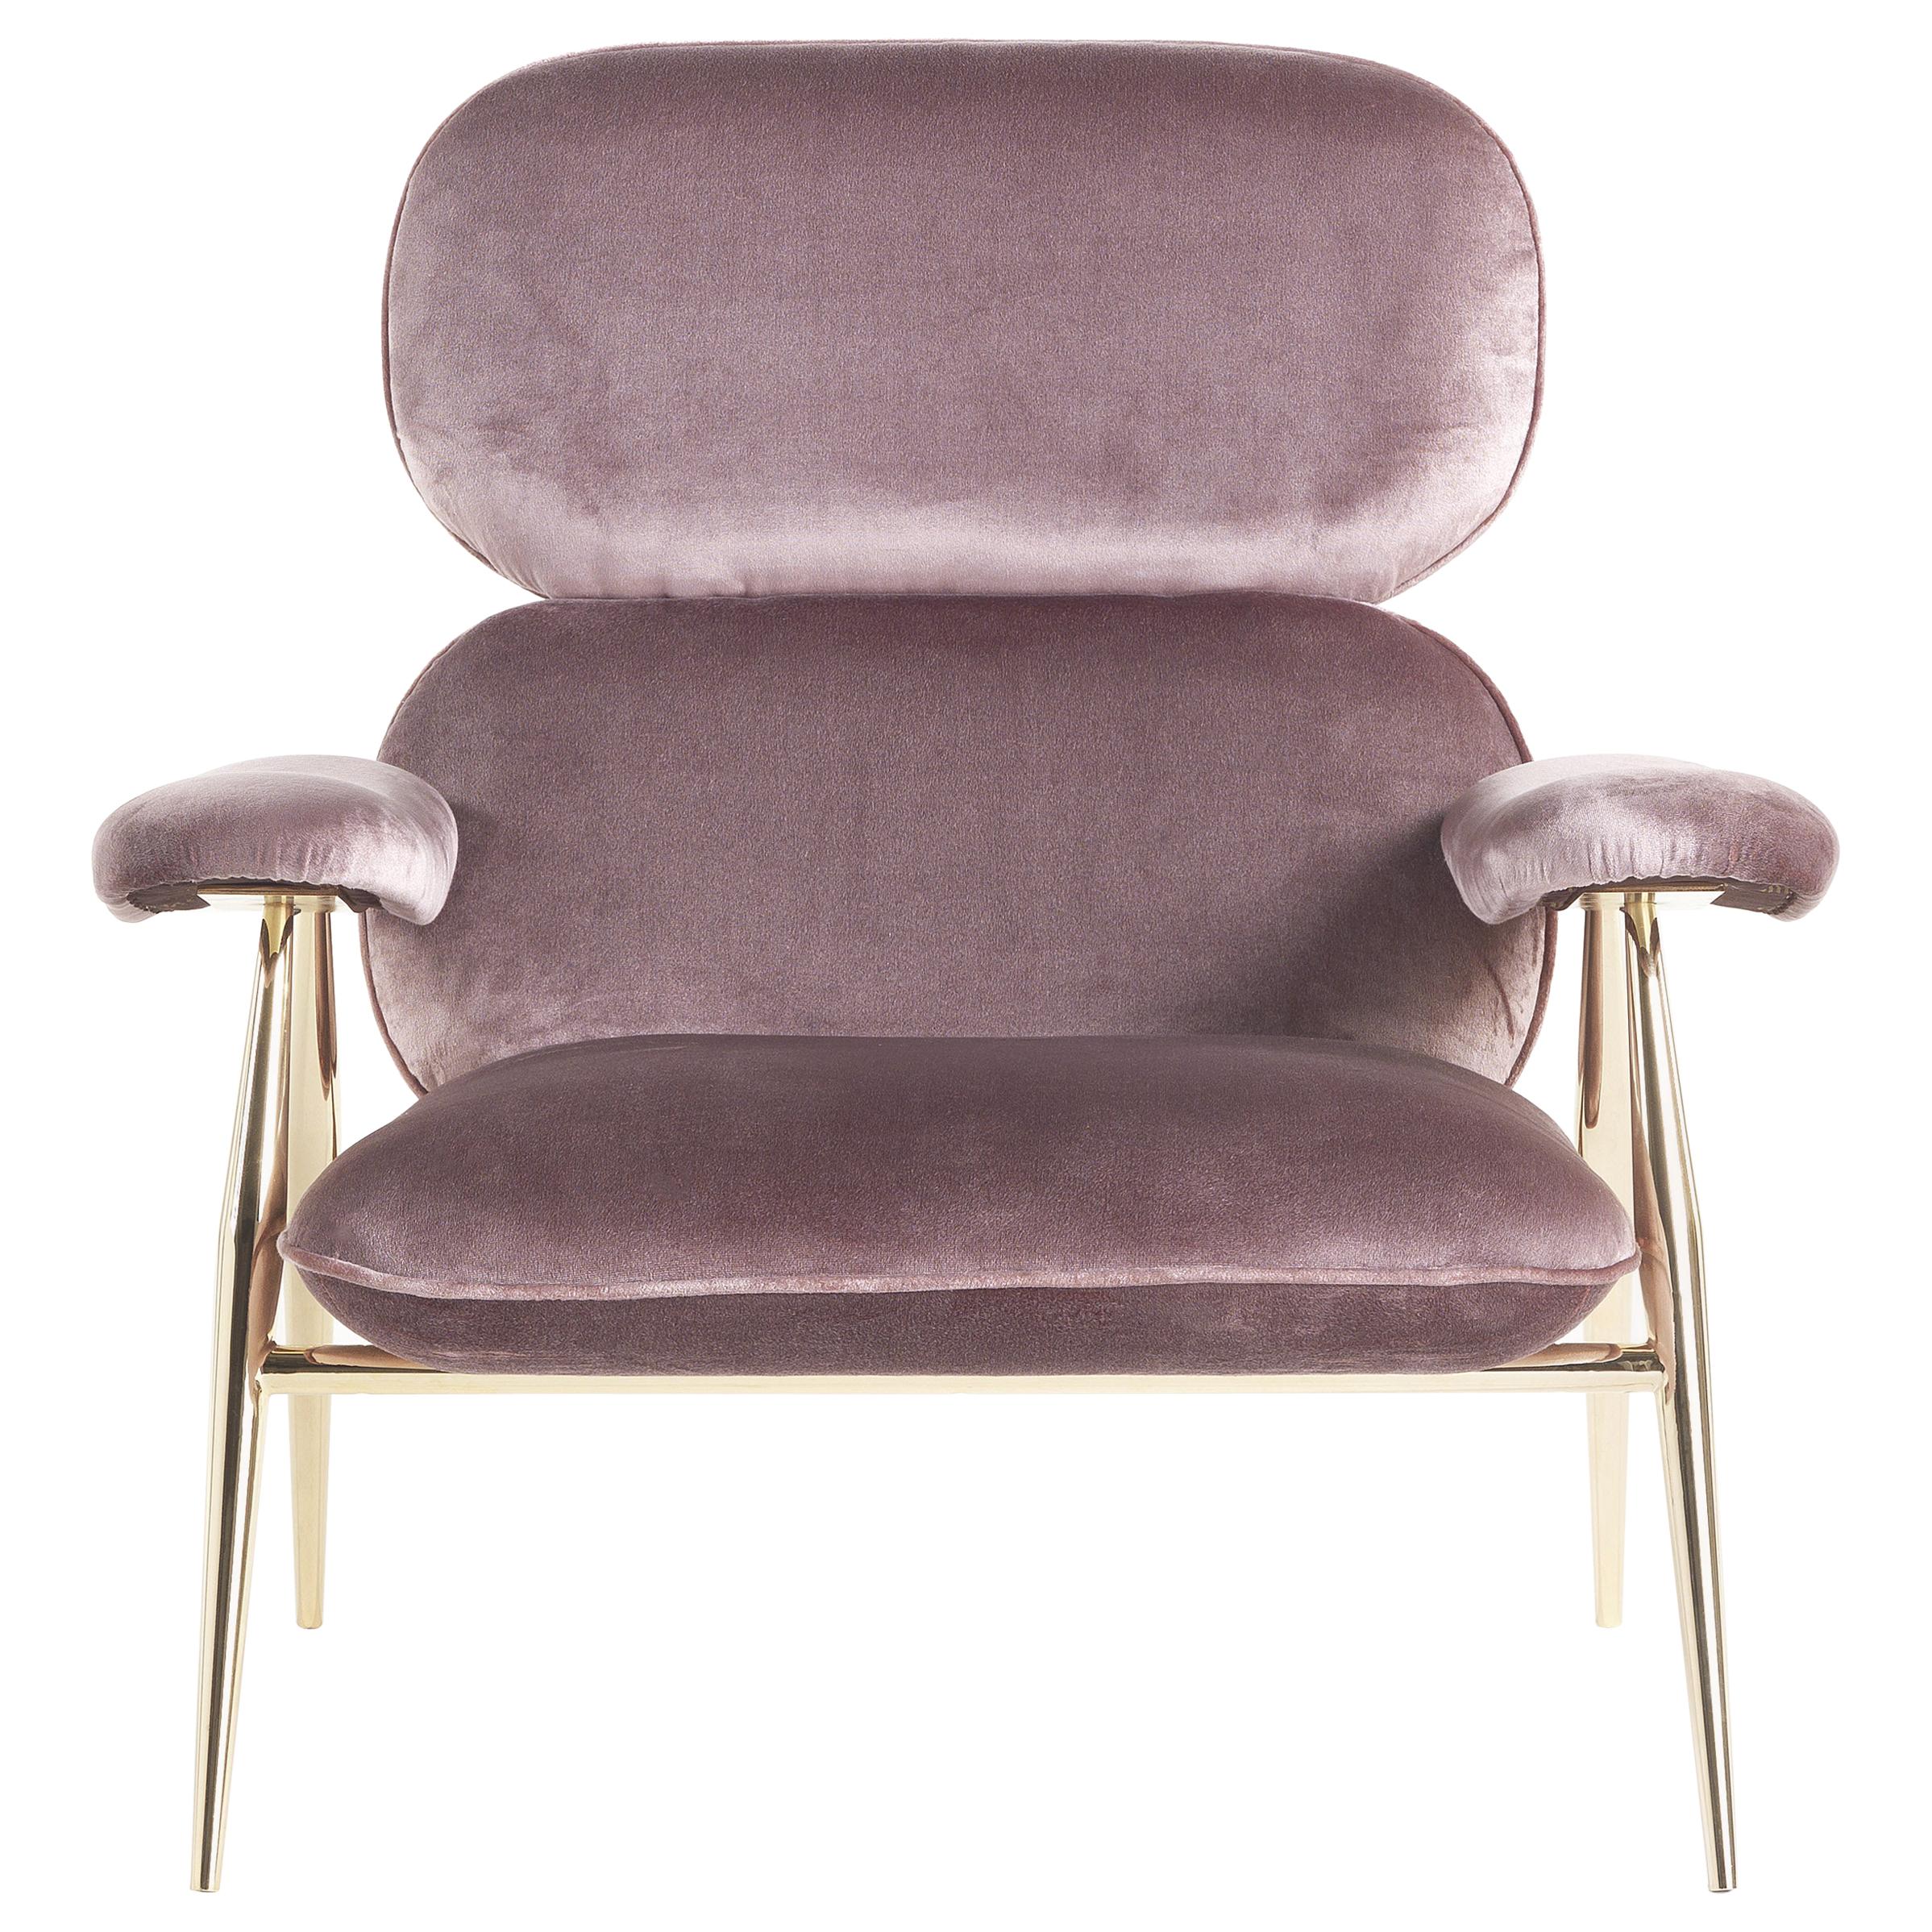 21st Century Tahiti Armchair in Pink Fabric by Roberto Cavalli Home Interiors For Sale